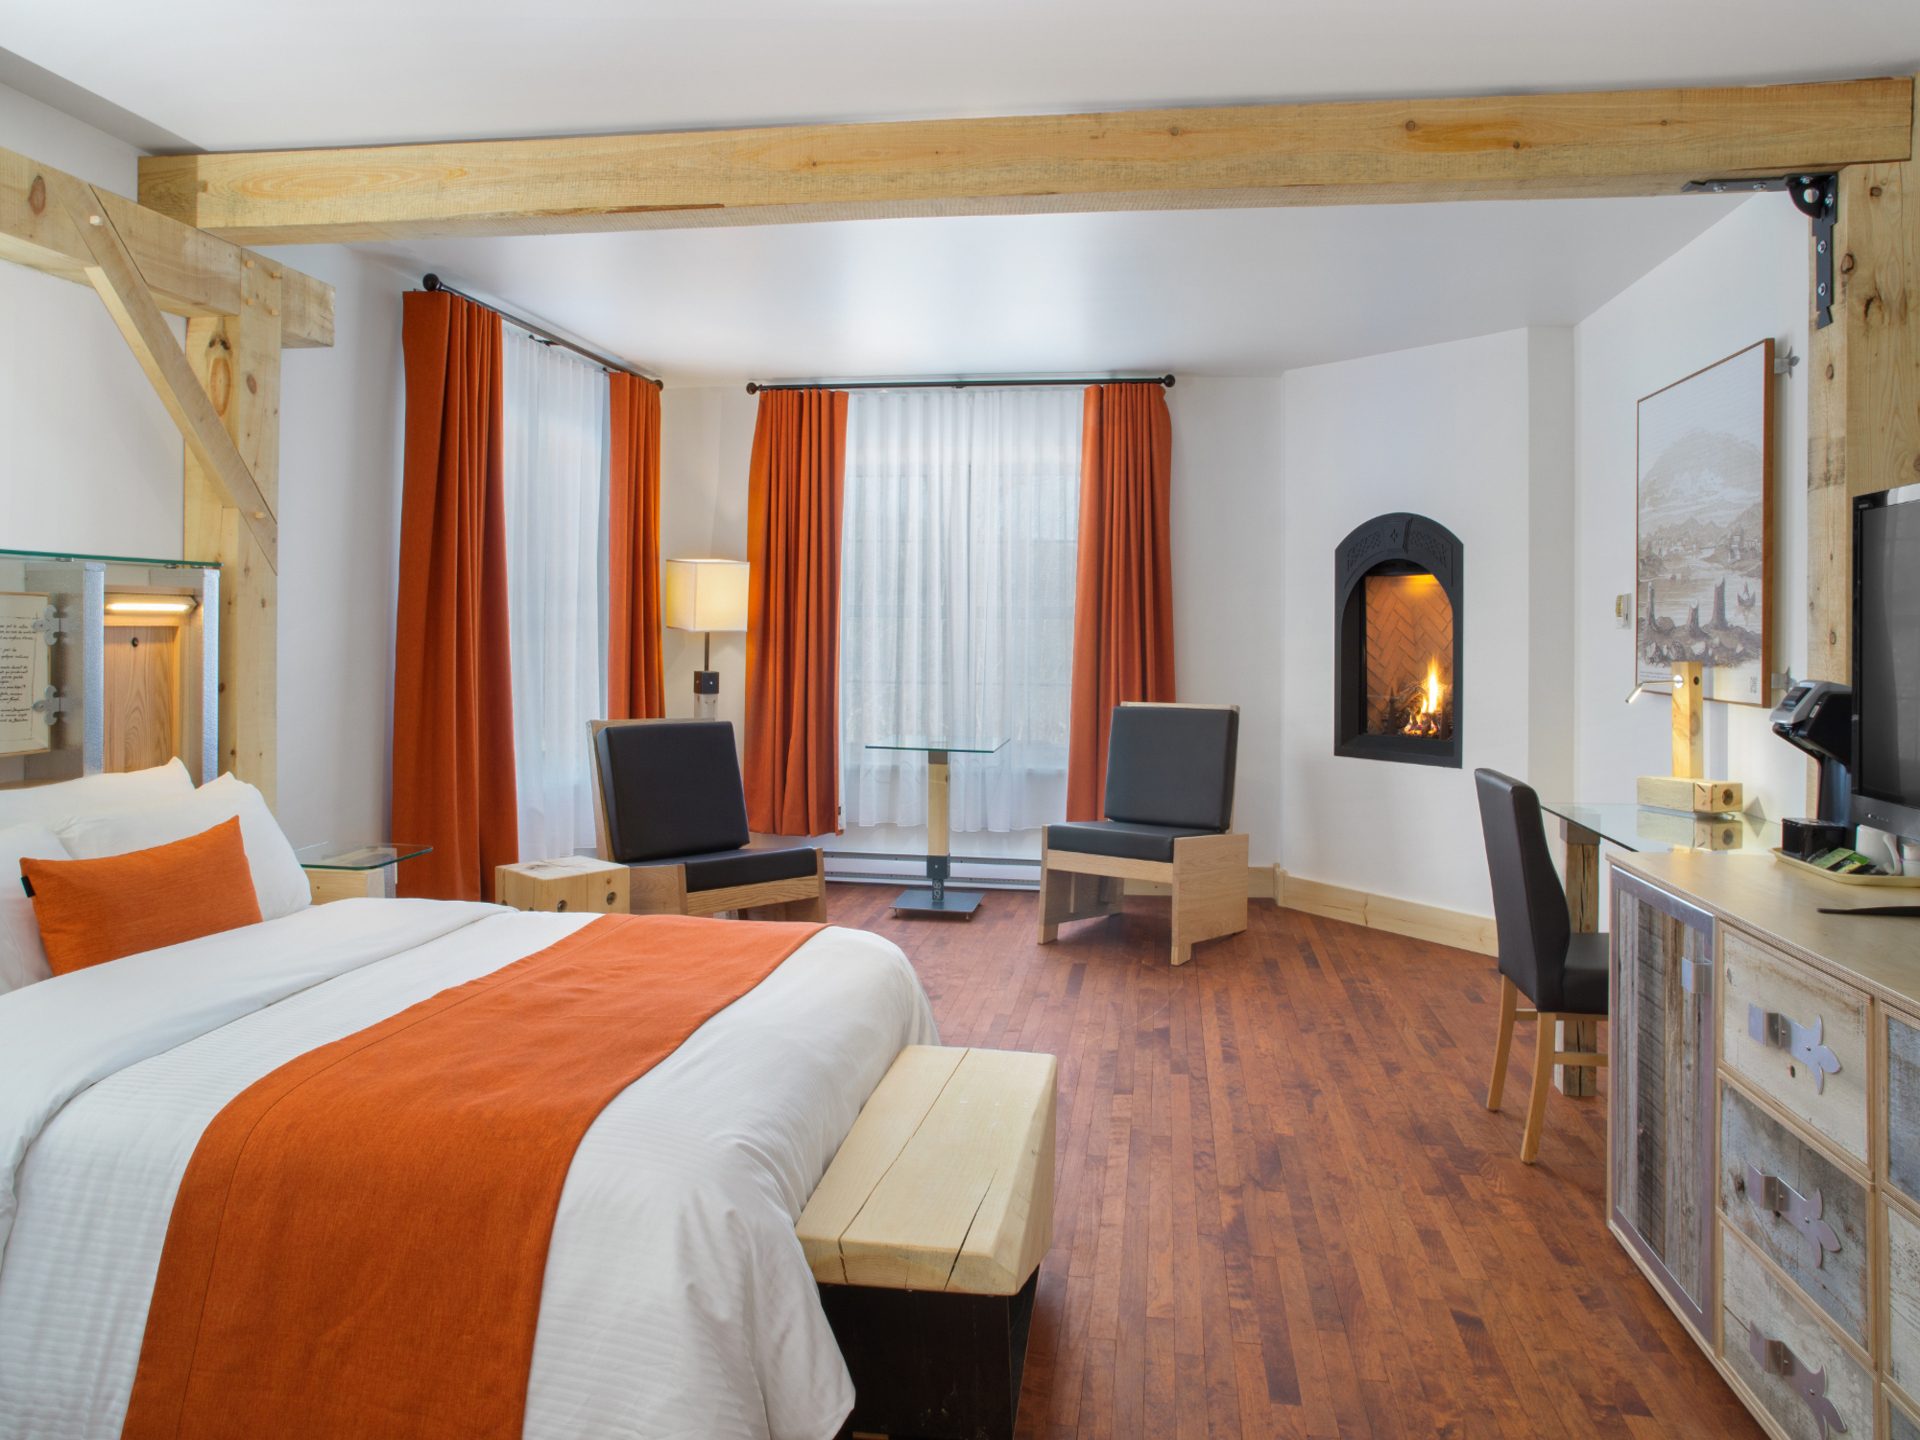 Chambre ambiance luxueuse en auberge